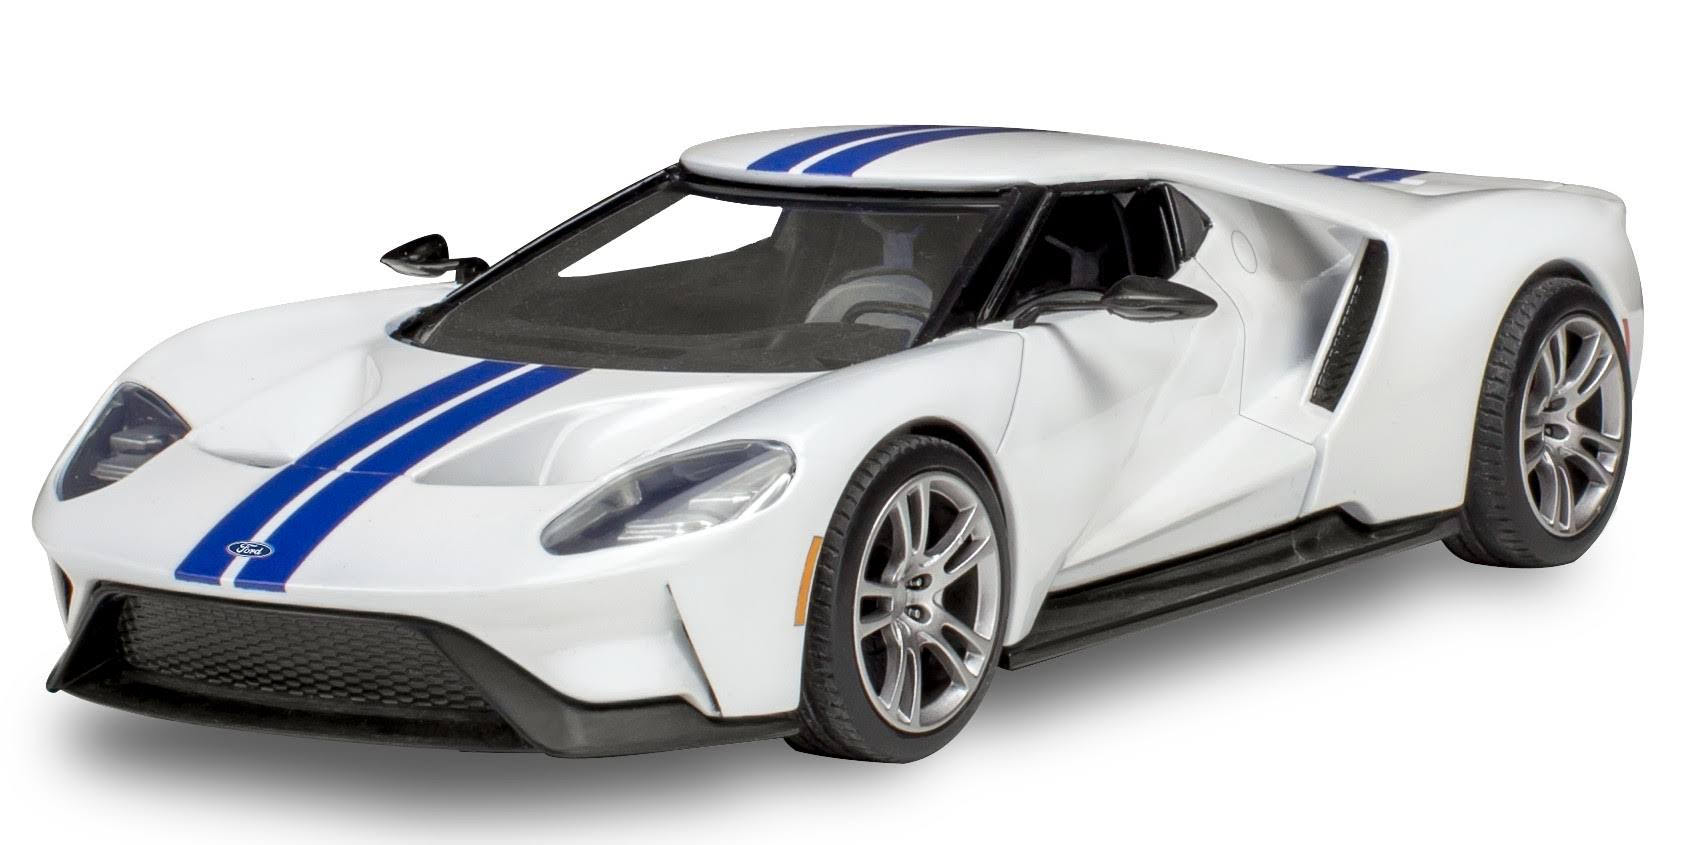 REVELL USA 2017 Ford Gt (85-1235) Easy-Click System 1:24 Scale Car Plastic Model Kit